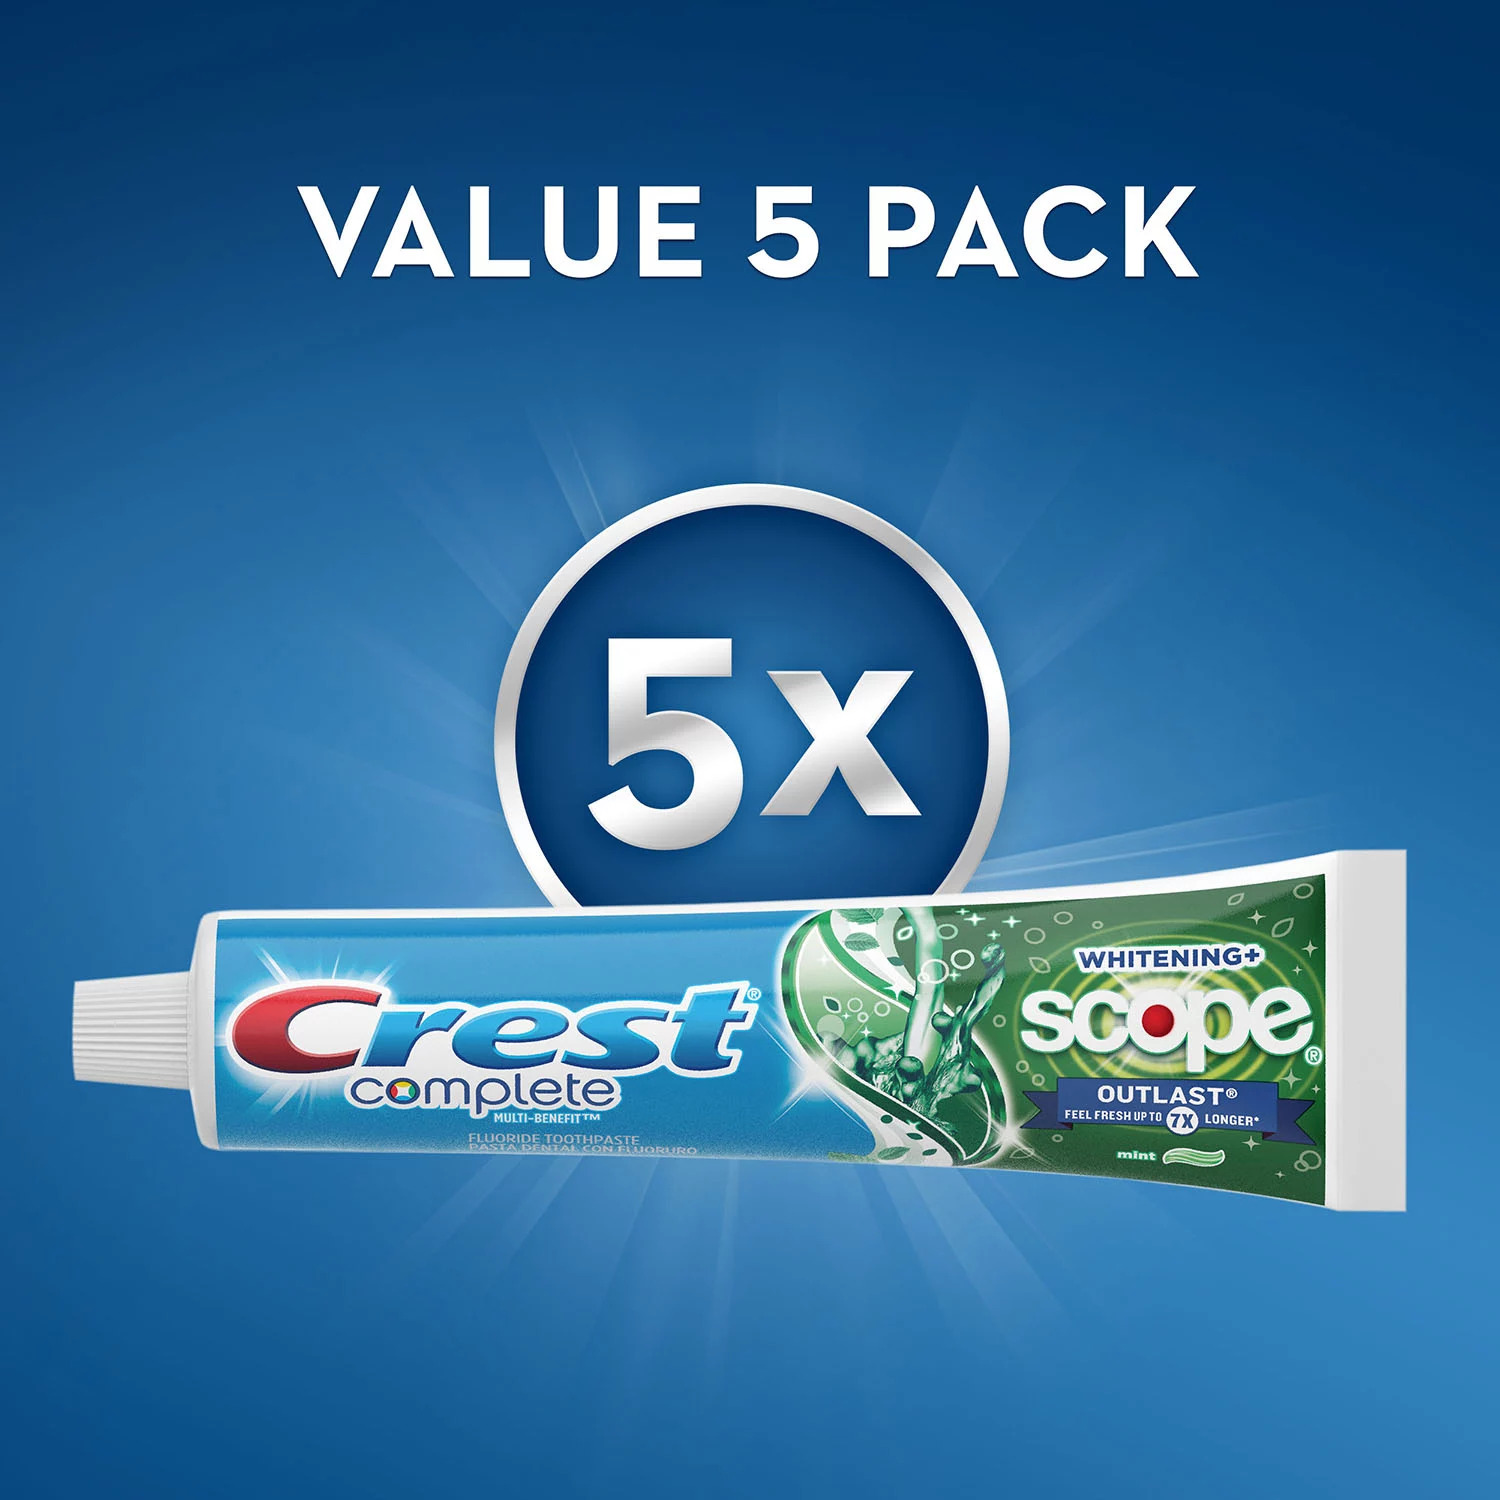 Crest Complete Whitening + Scope Toothpaste, 5 Ct, 5.8 Oz - image 2 of 4